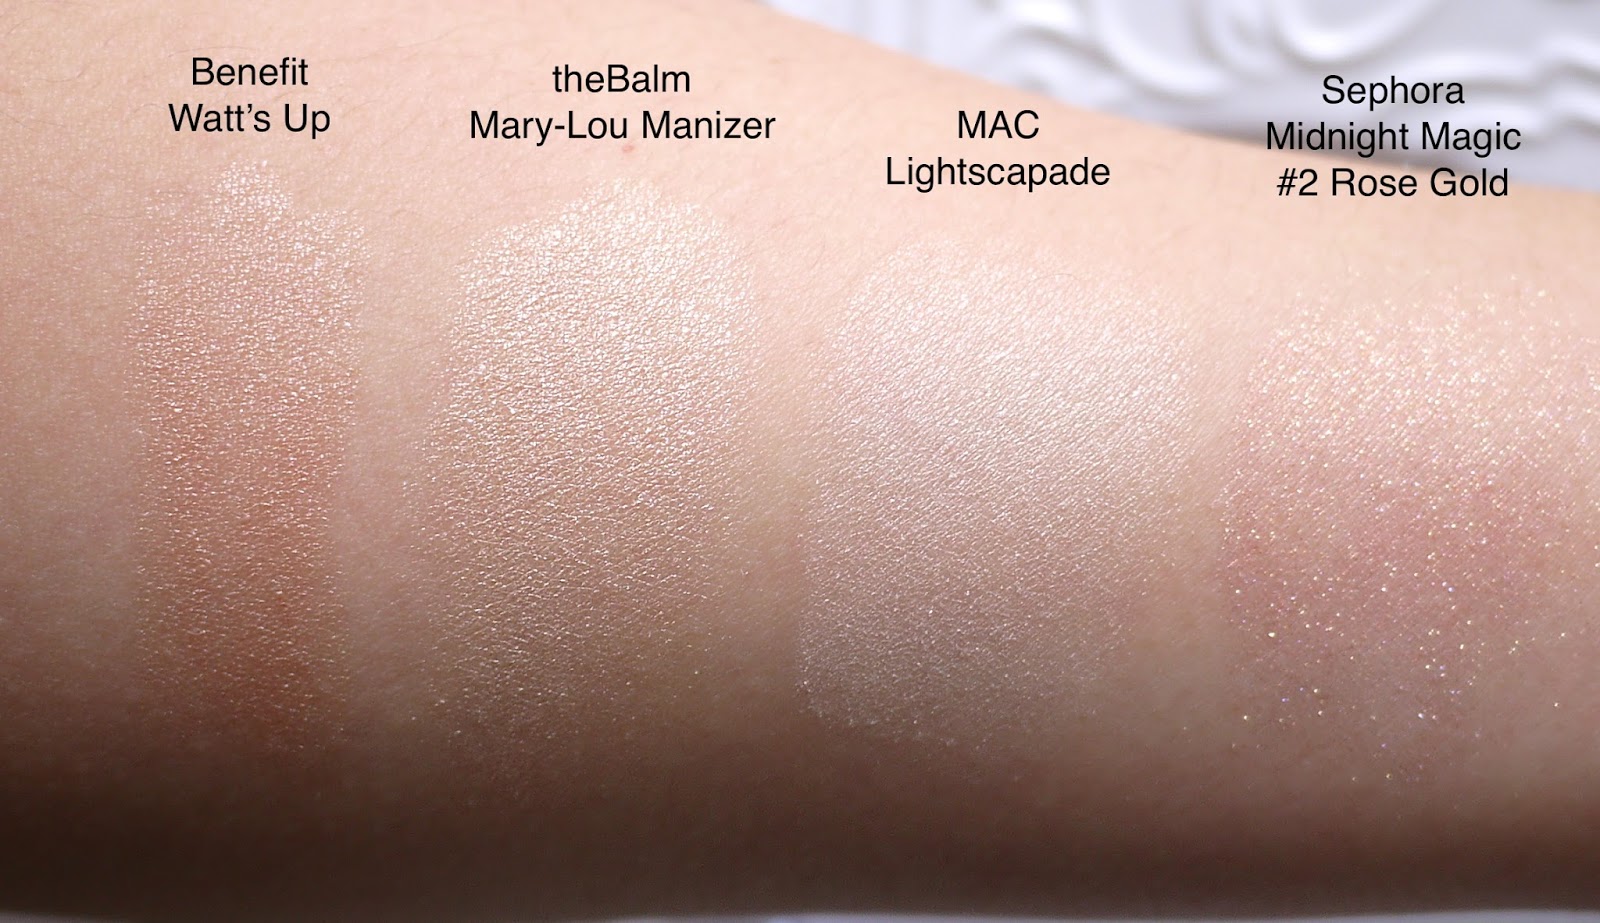 benefit watt's up, thebalm mary-lou manizer, mac lightscapade sephora midnight magic face and body glitter #2 rose gold review and swatch